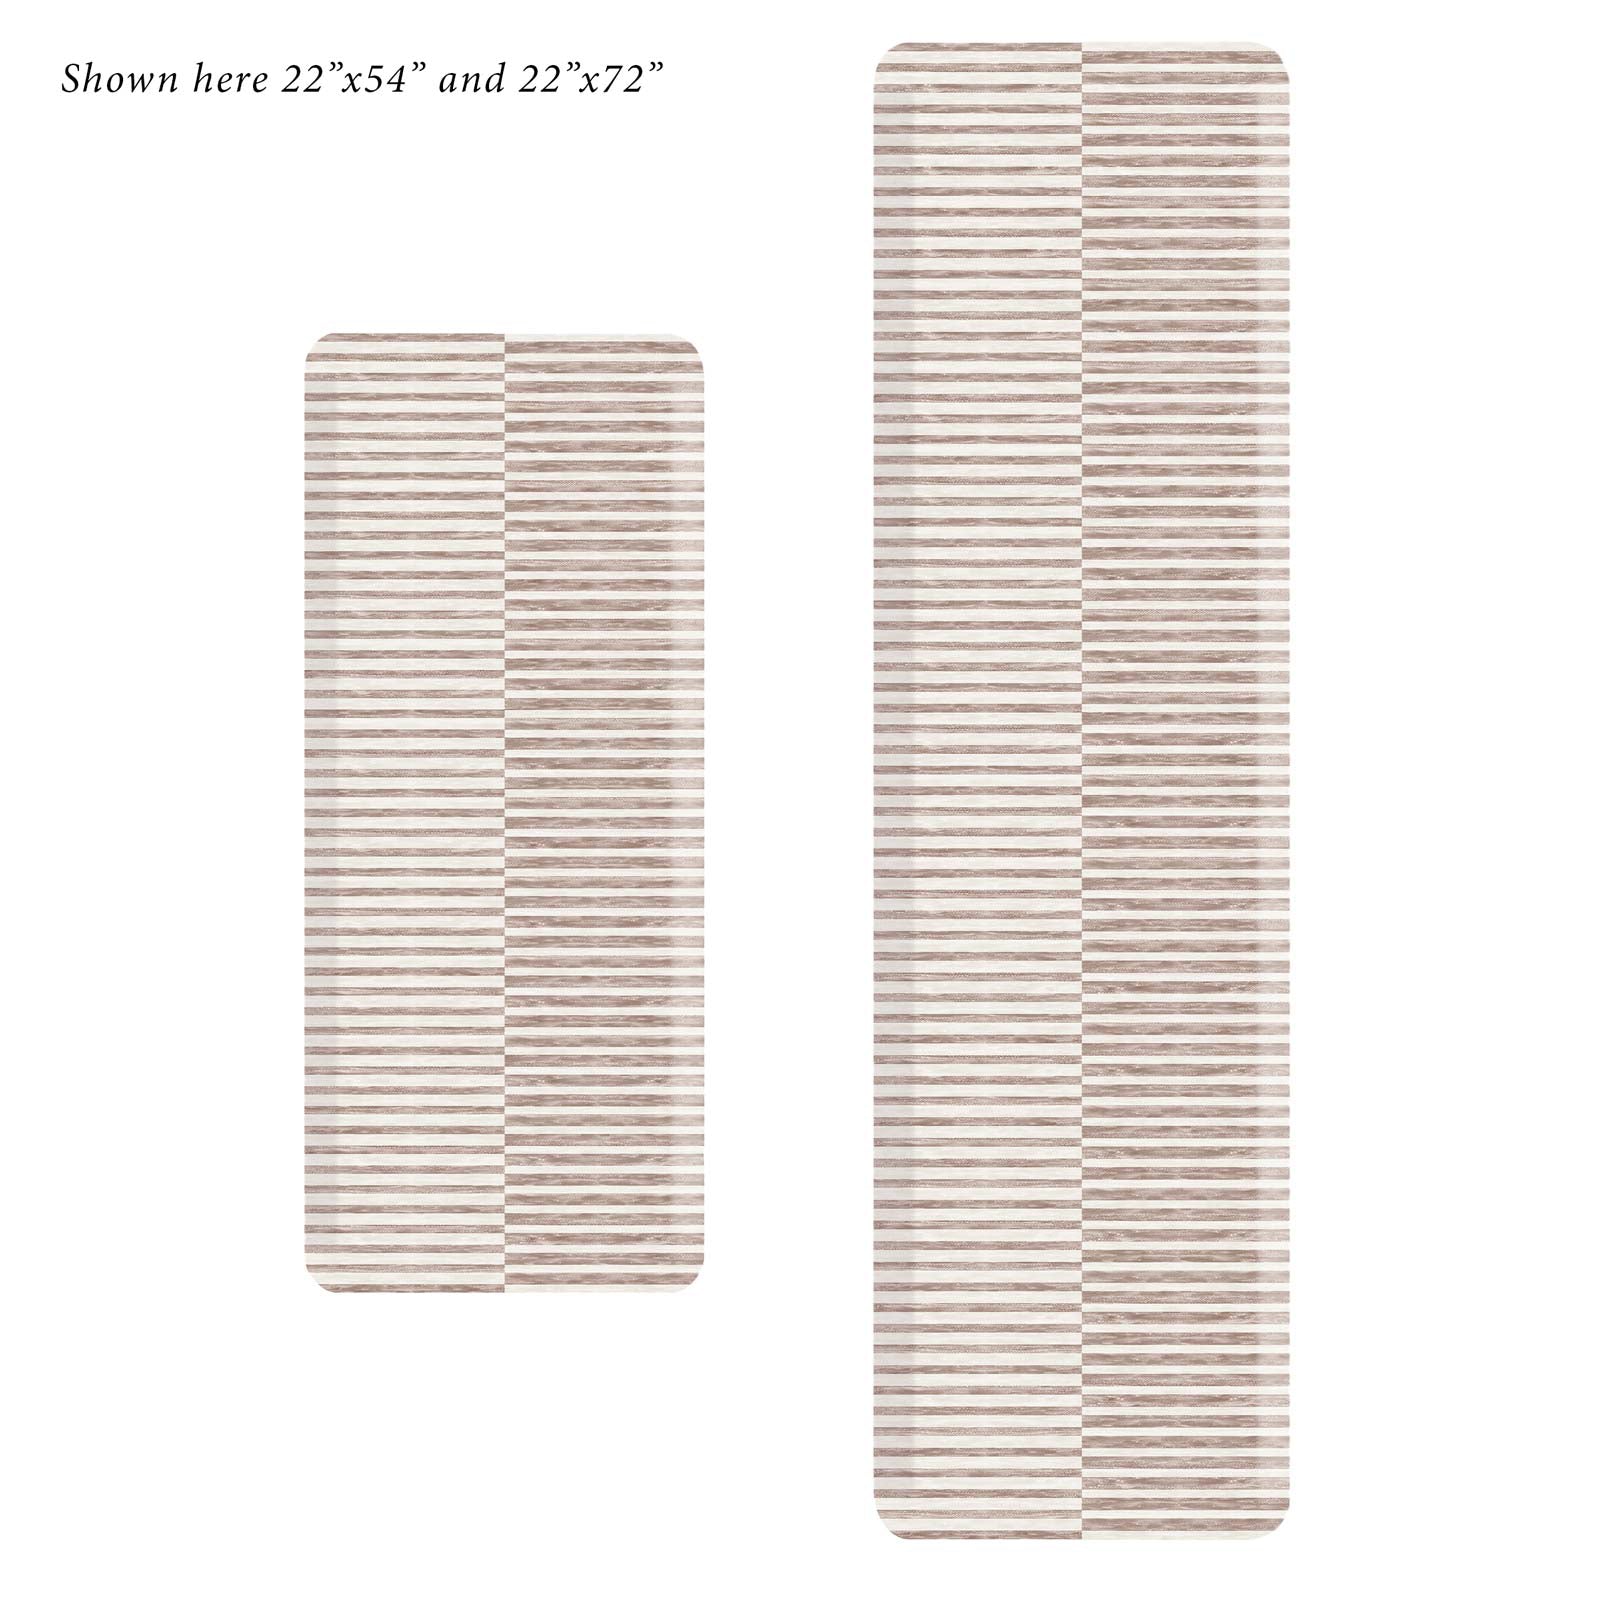 Reese chai beige and white inverted stripe standing mat shown in sizes 22x54 and 22x72